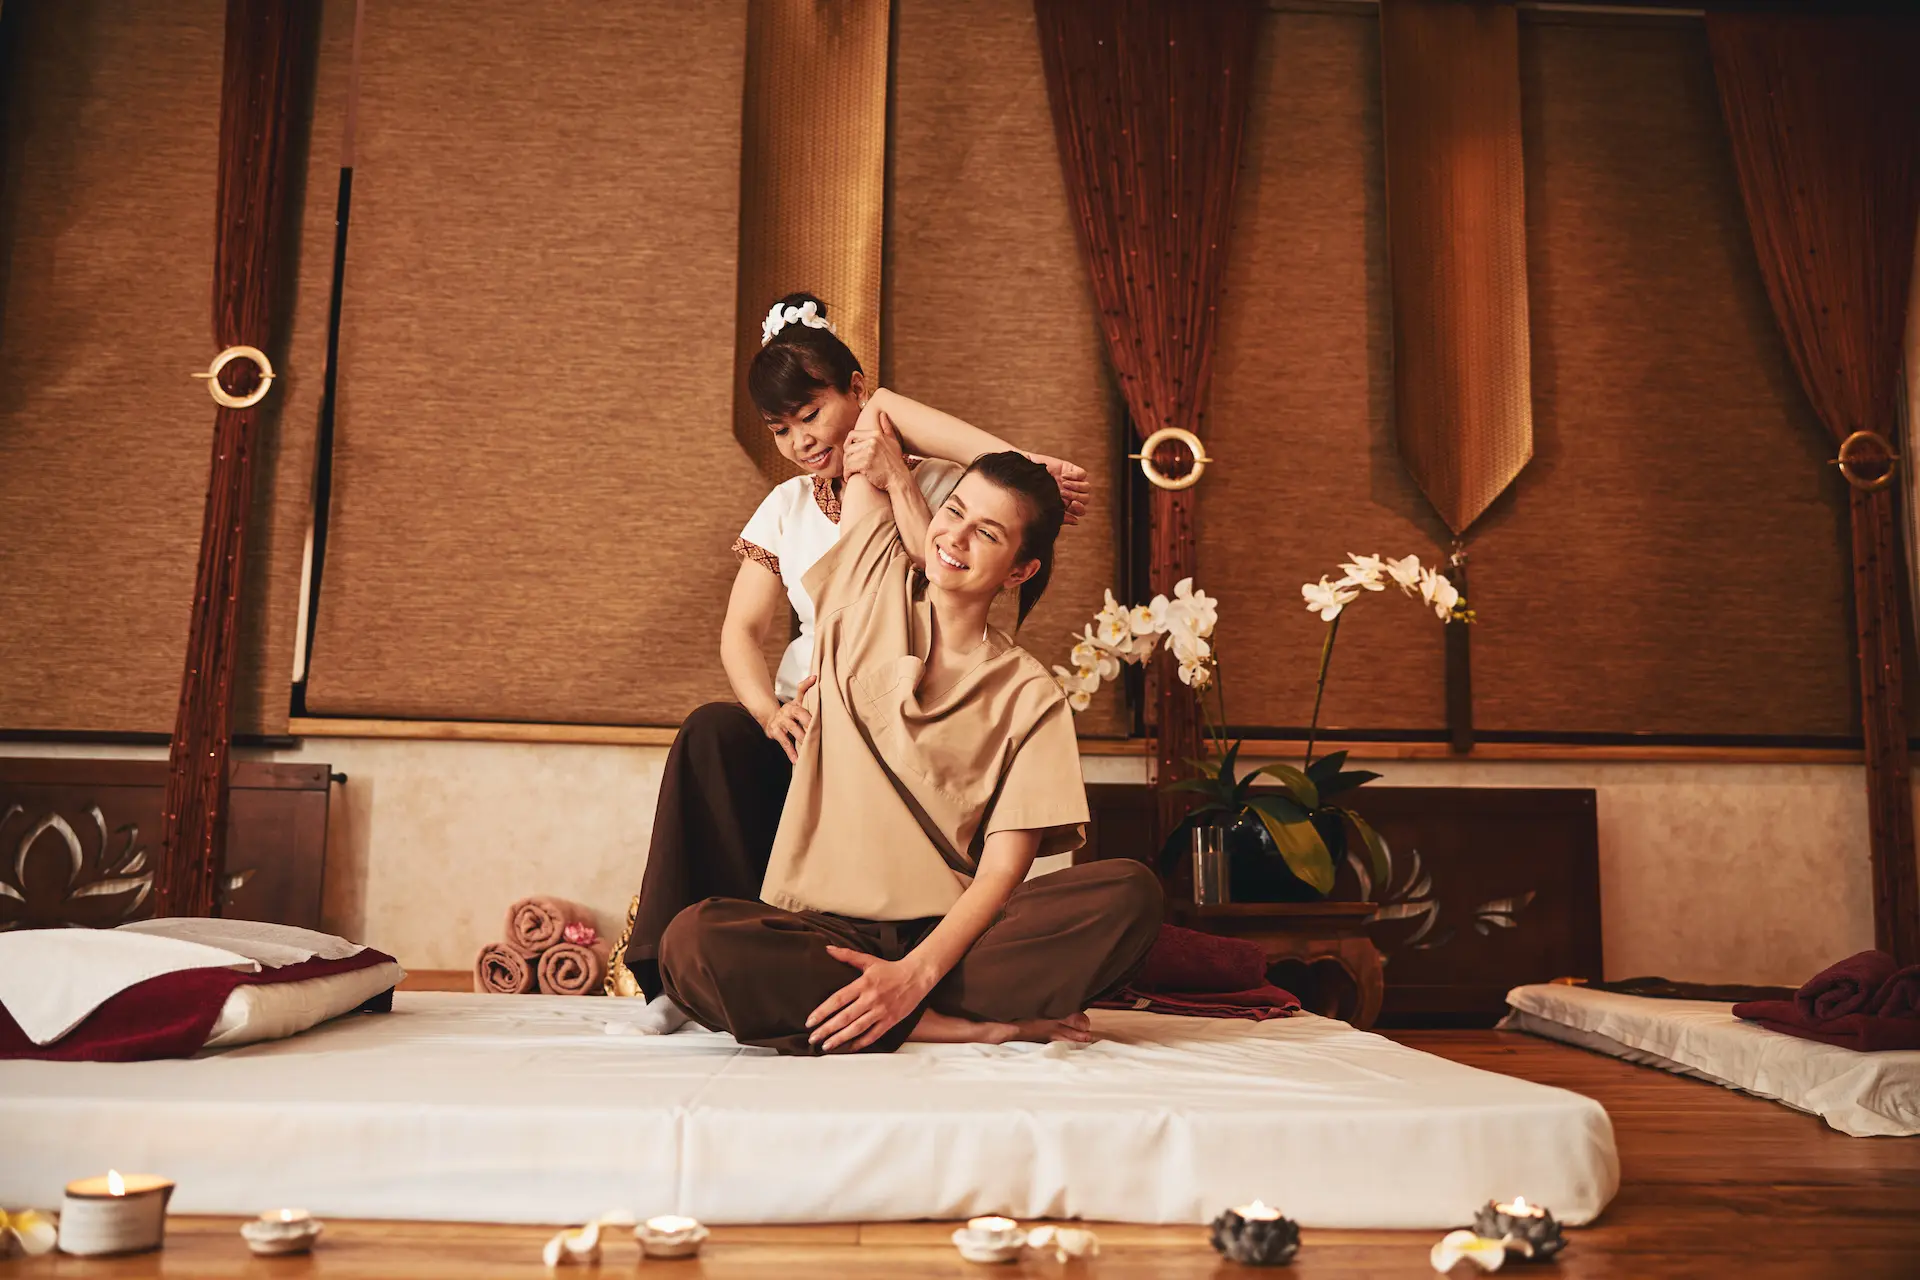 The Thai massage specialist is lifting the right arm of the smiling woman while pressing her palm to the client's waist.